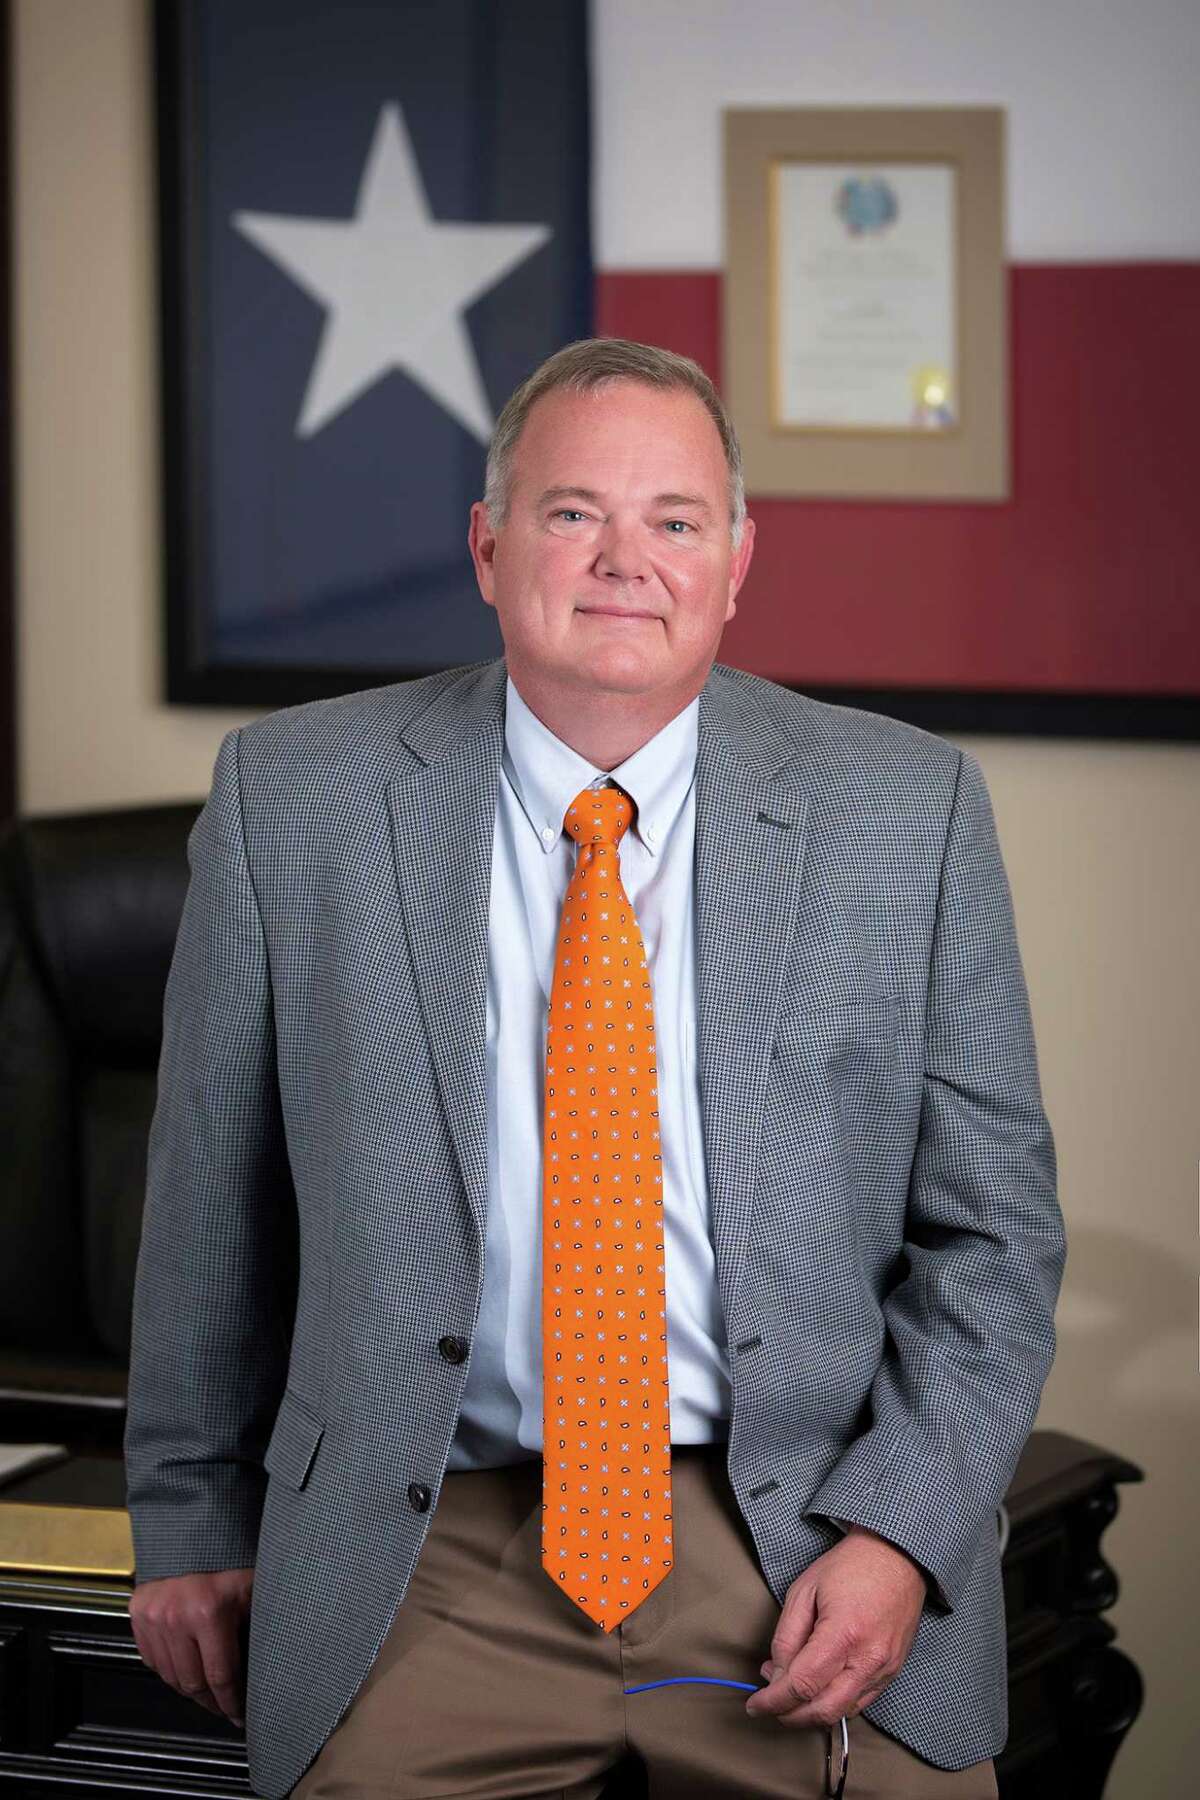 East Chambers ISD's Scott Campbell was recently named the Region 4 Superintendent of the Year by the Texas Association of School Boards.